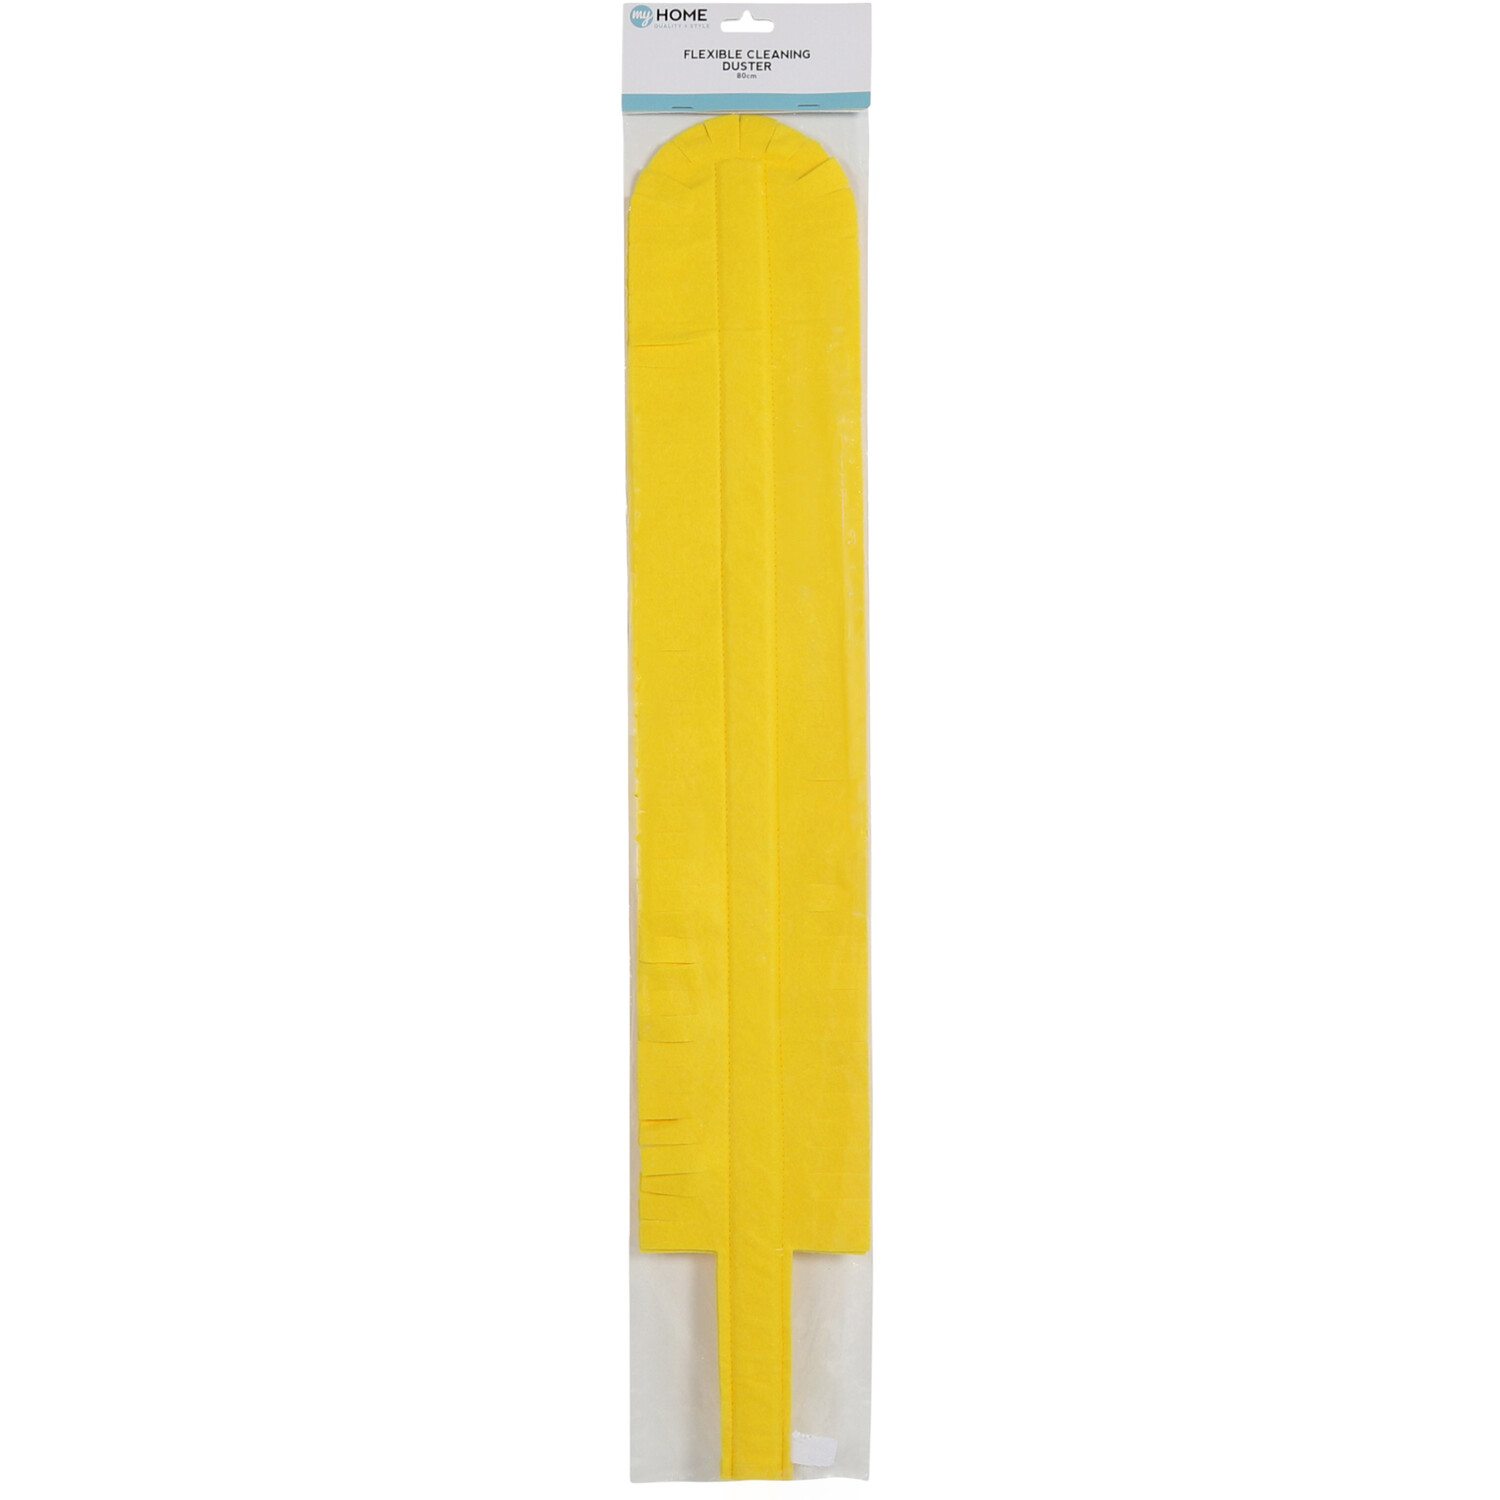 My Home Flexible Cleaning Duster - Yellow Image 1